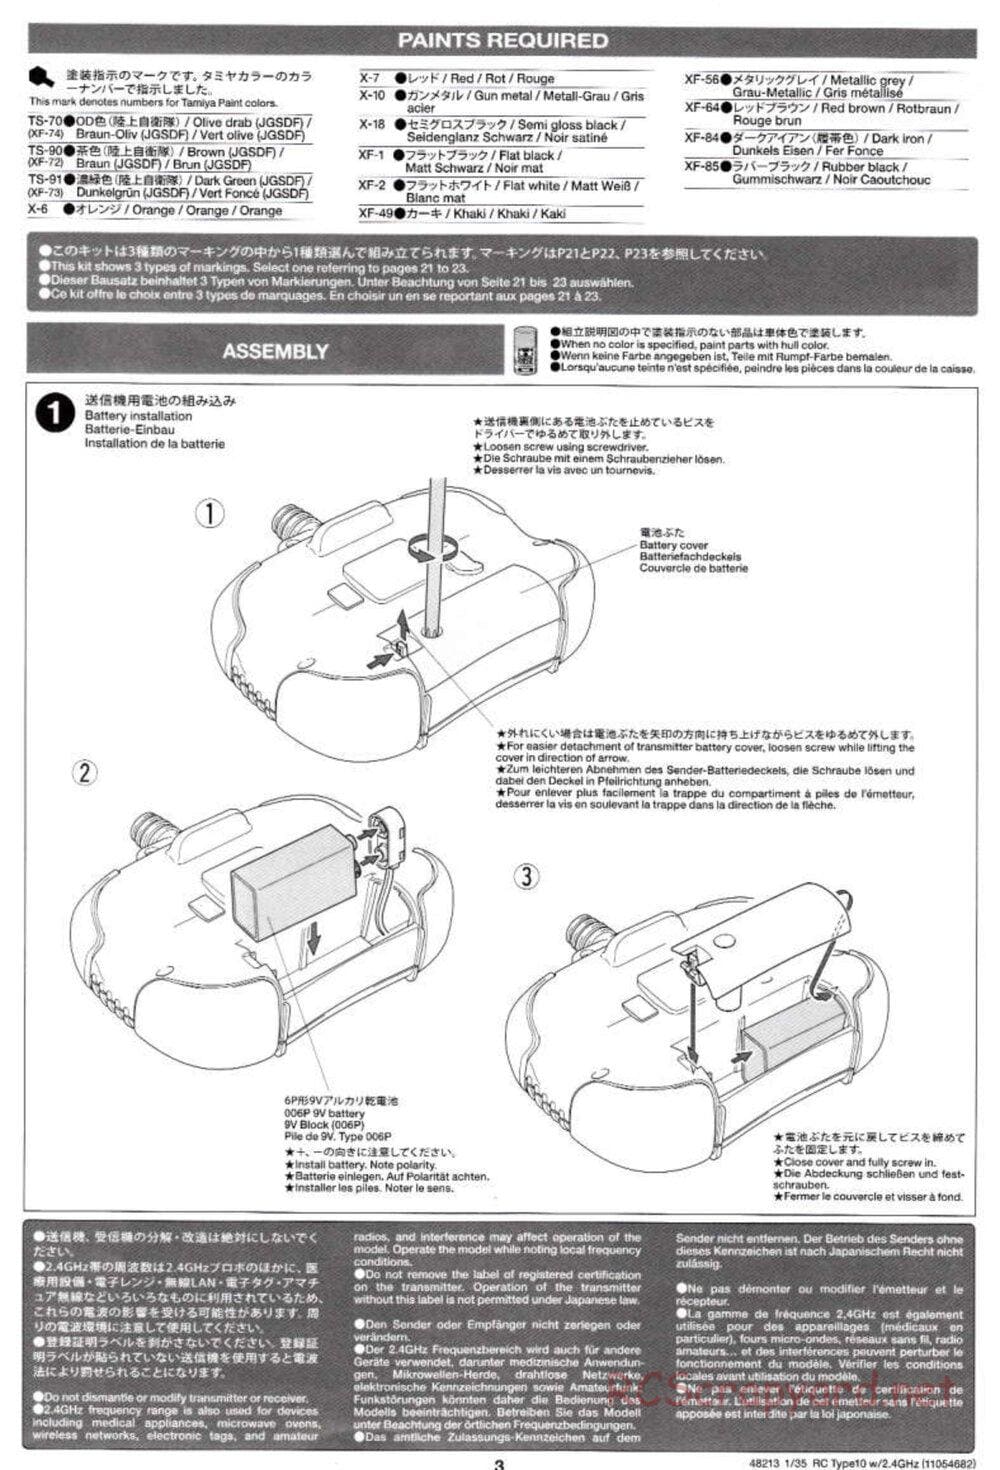 Tamiya - JGSDF Type 10 Tank - 1/35 Scale Chassis - Manual - Page 3